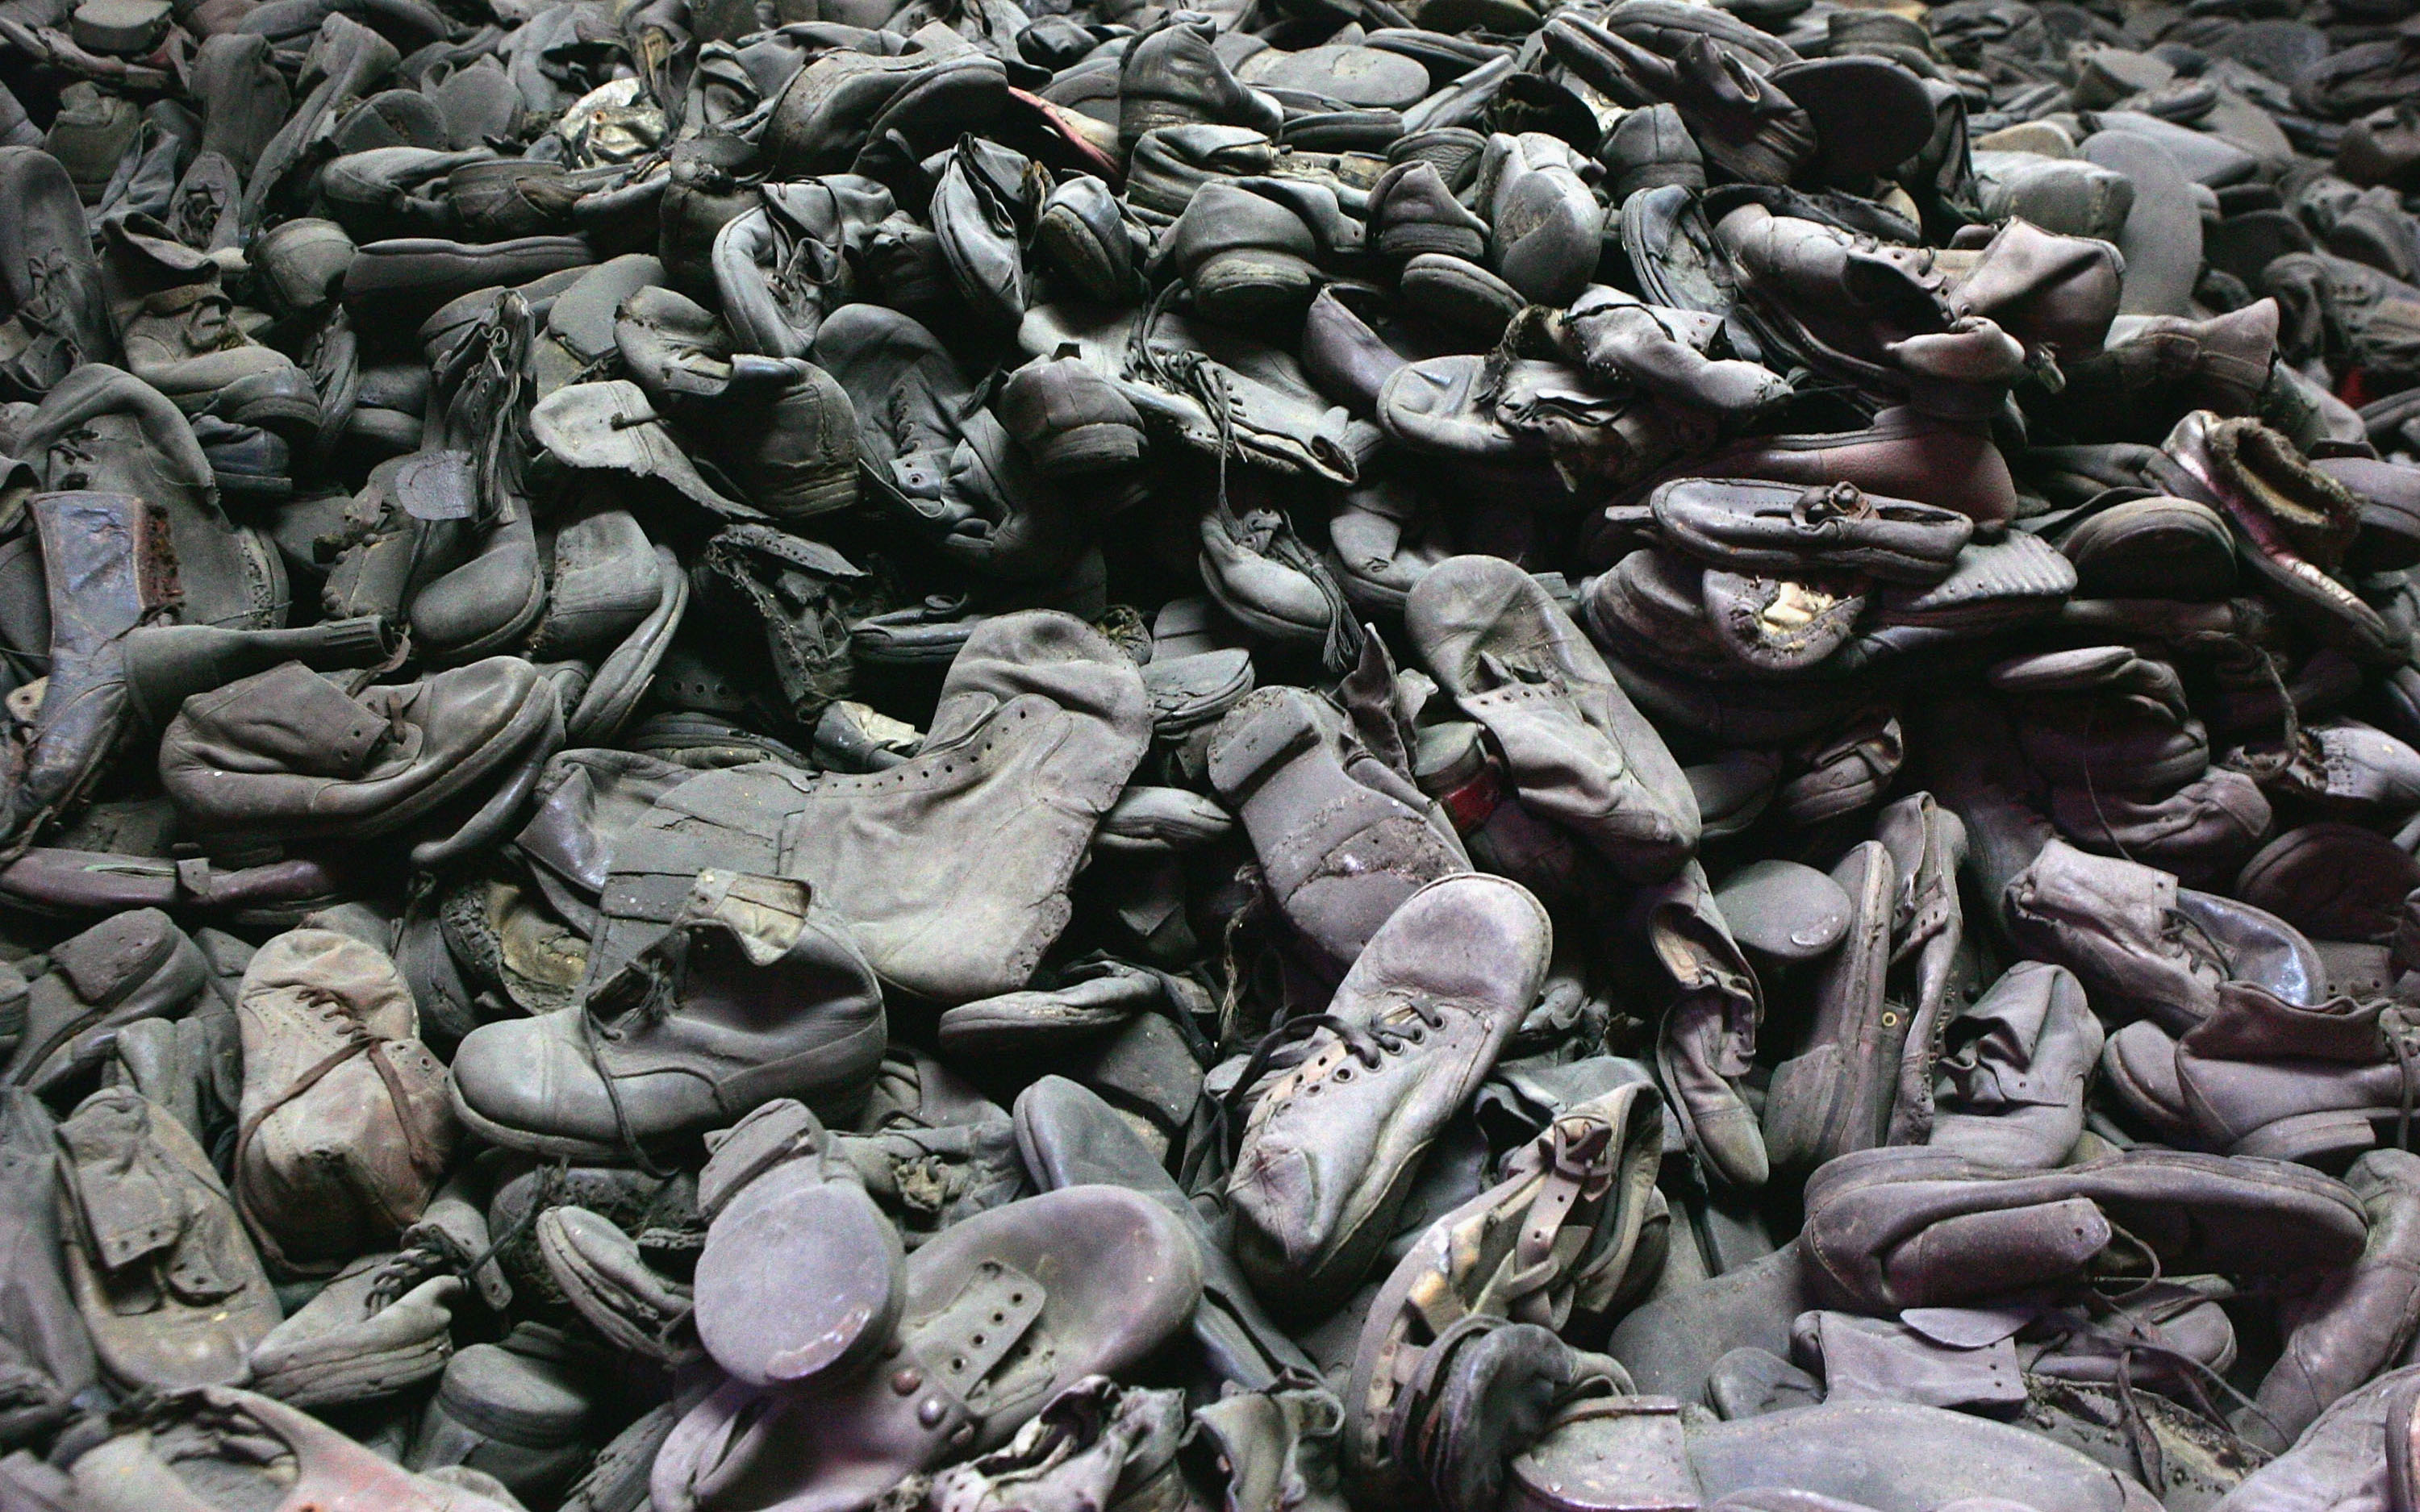 BREZEZINKA, POLAND - DECEMBER 8: A mass of footware removed from the men, women and children, taken December 8, 2004 is seen at the Auschwitz Concentration Camp Museum in Oswiecim, Poland. The camp was liberated by the Soviet army on January 27, 1945, January 2005 will be the 60th anniversary of the liberation of the extermination and concentration camps, when survivors and victims who suffered as a result of the Holocaust will commemorated across the world. (Photo by Scott Barbour/Getty Images)